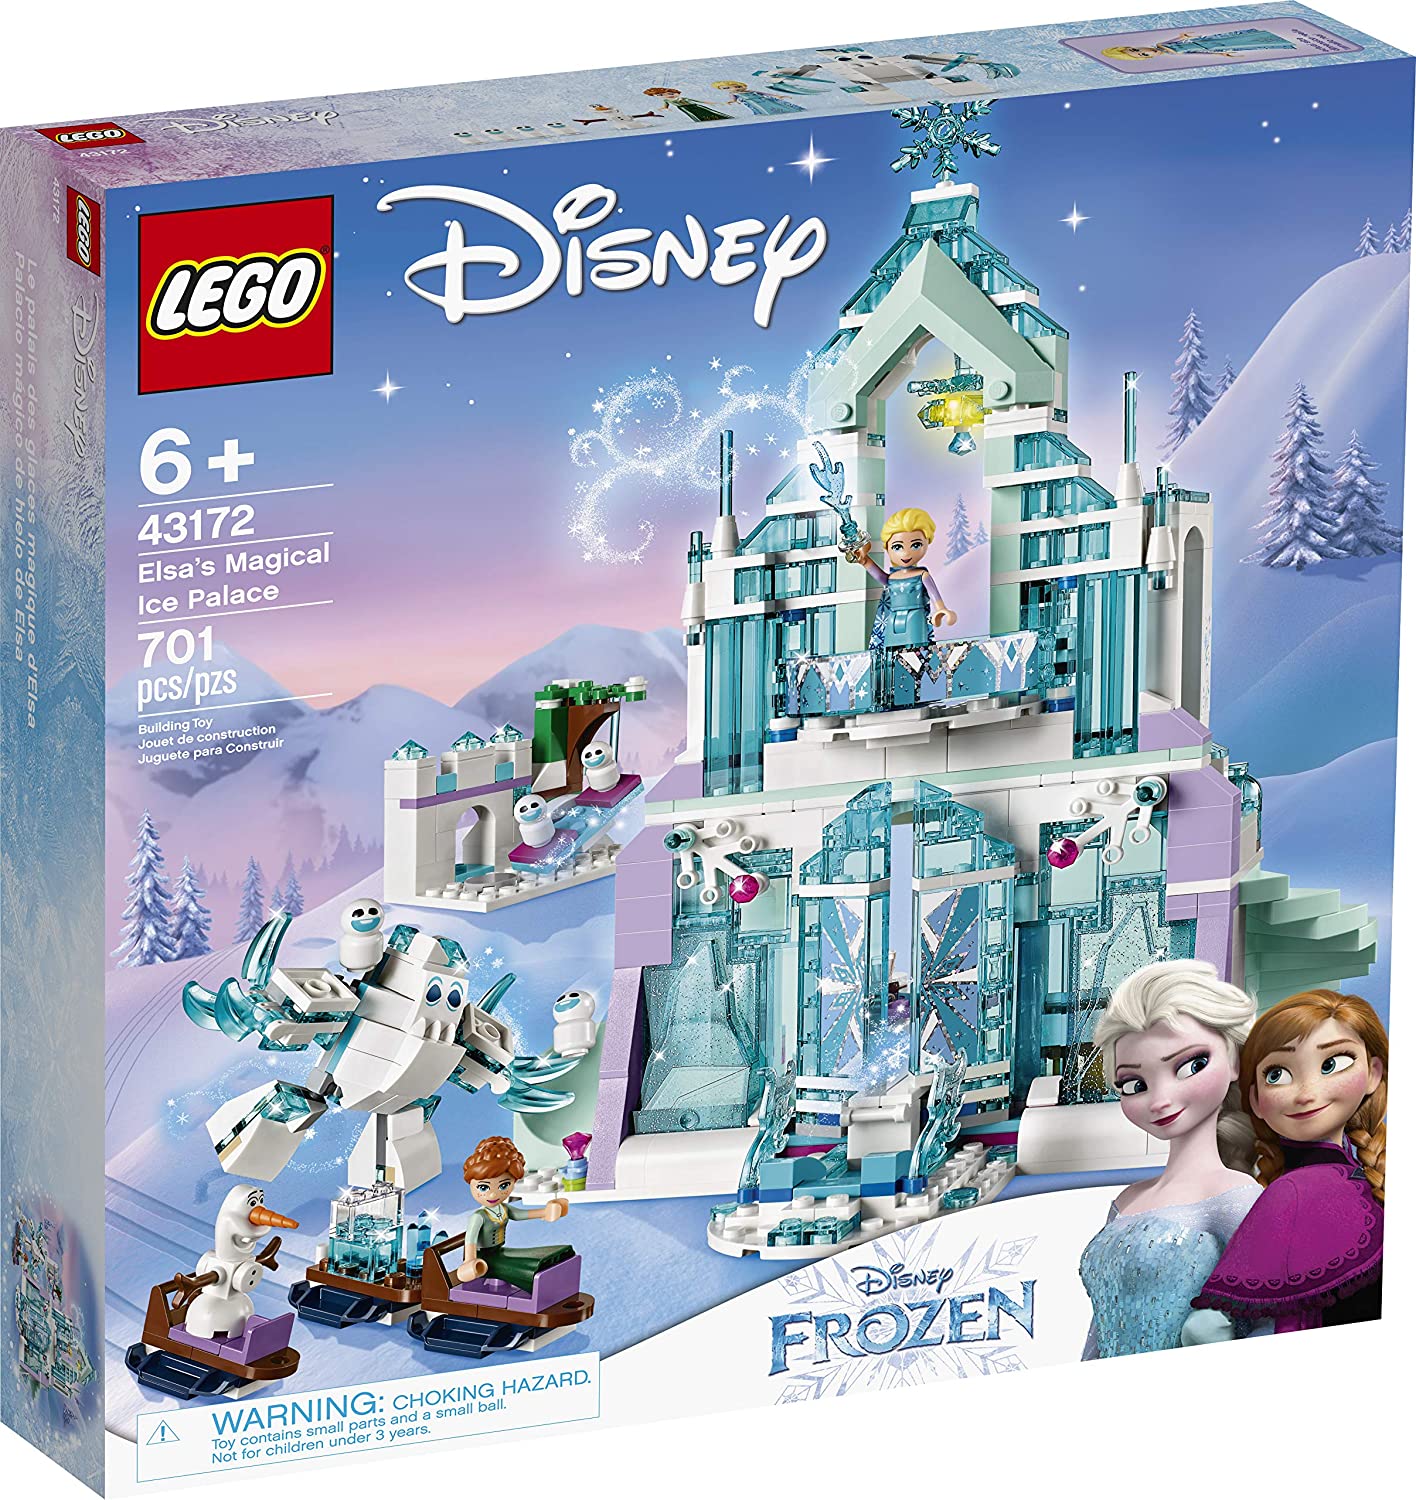 Original LEGO Disney Princess Elsa Magic Ice Palace 43172 toy castle puzzle  set with mini dolls, castle toy set with famous Frozen characters,  including Aisha, Olaf, Anna, and more. (701 pieces) Guaranteed